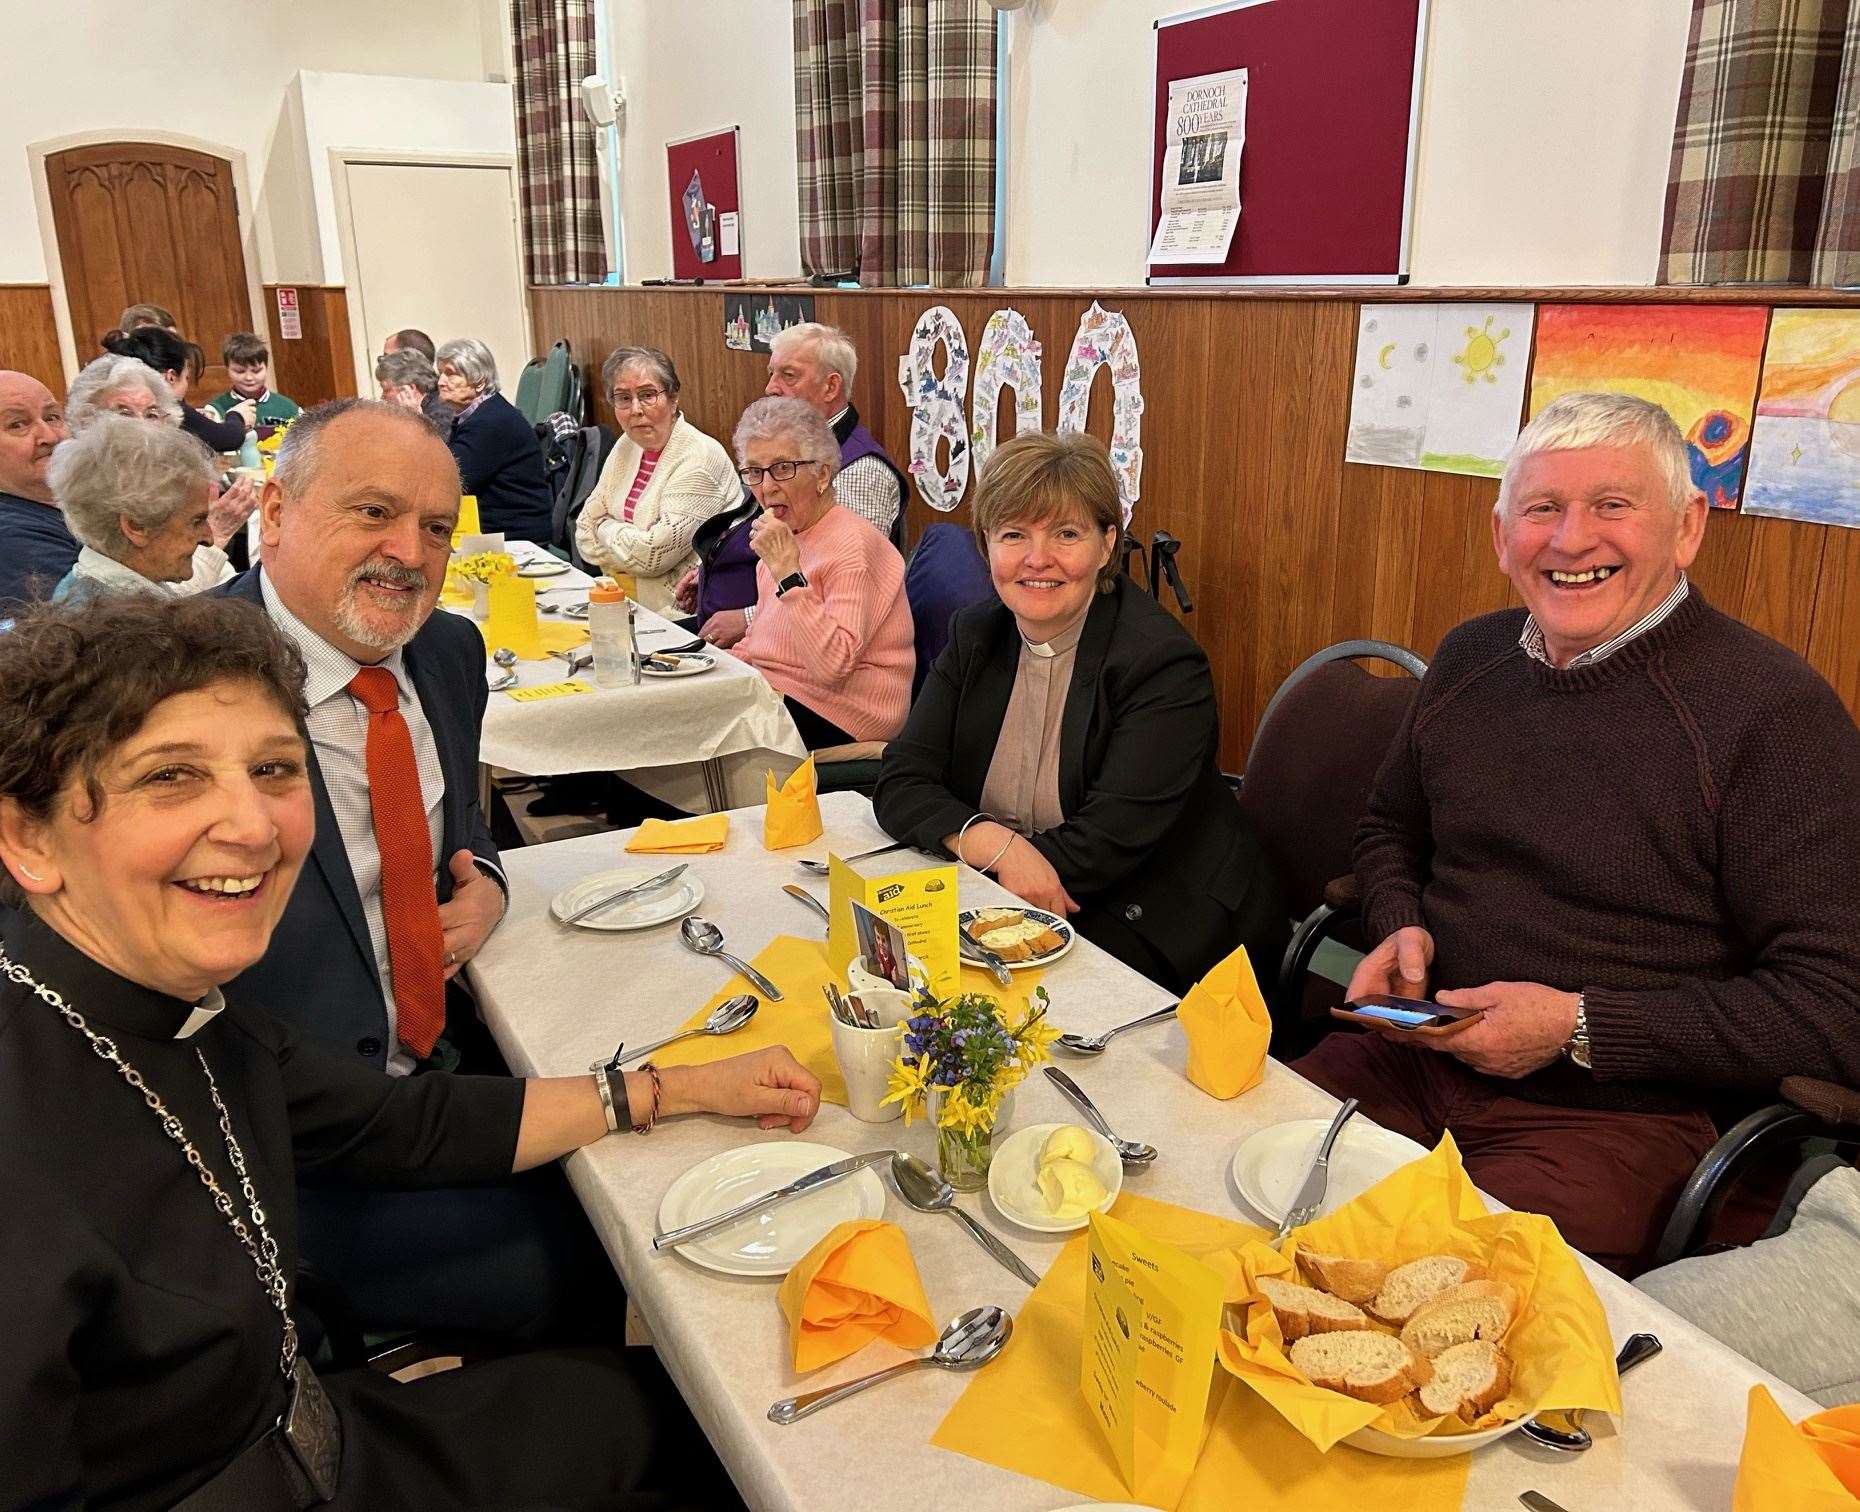 The Moderator joined the congregation at the West Church Hall for a Soup & Sweet lunch in support of Christian Aid.